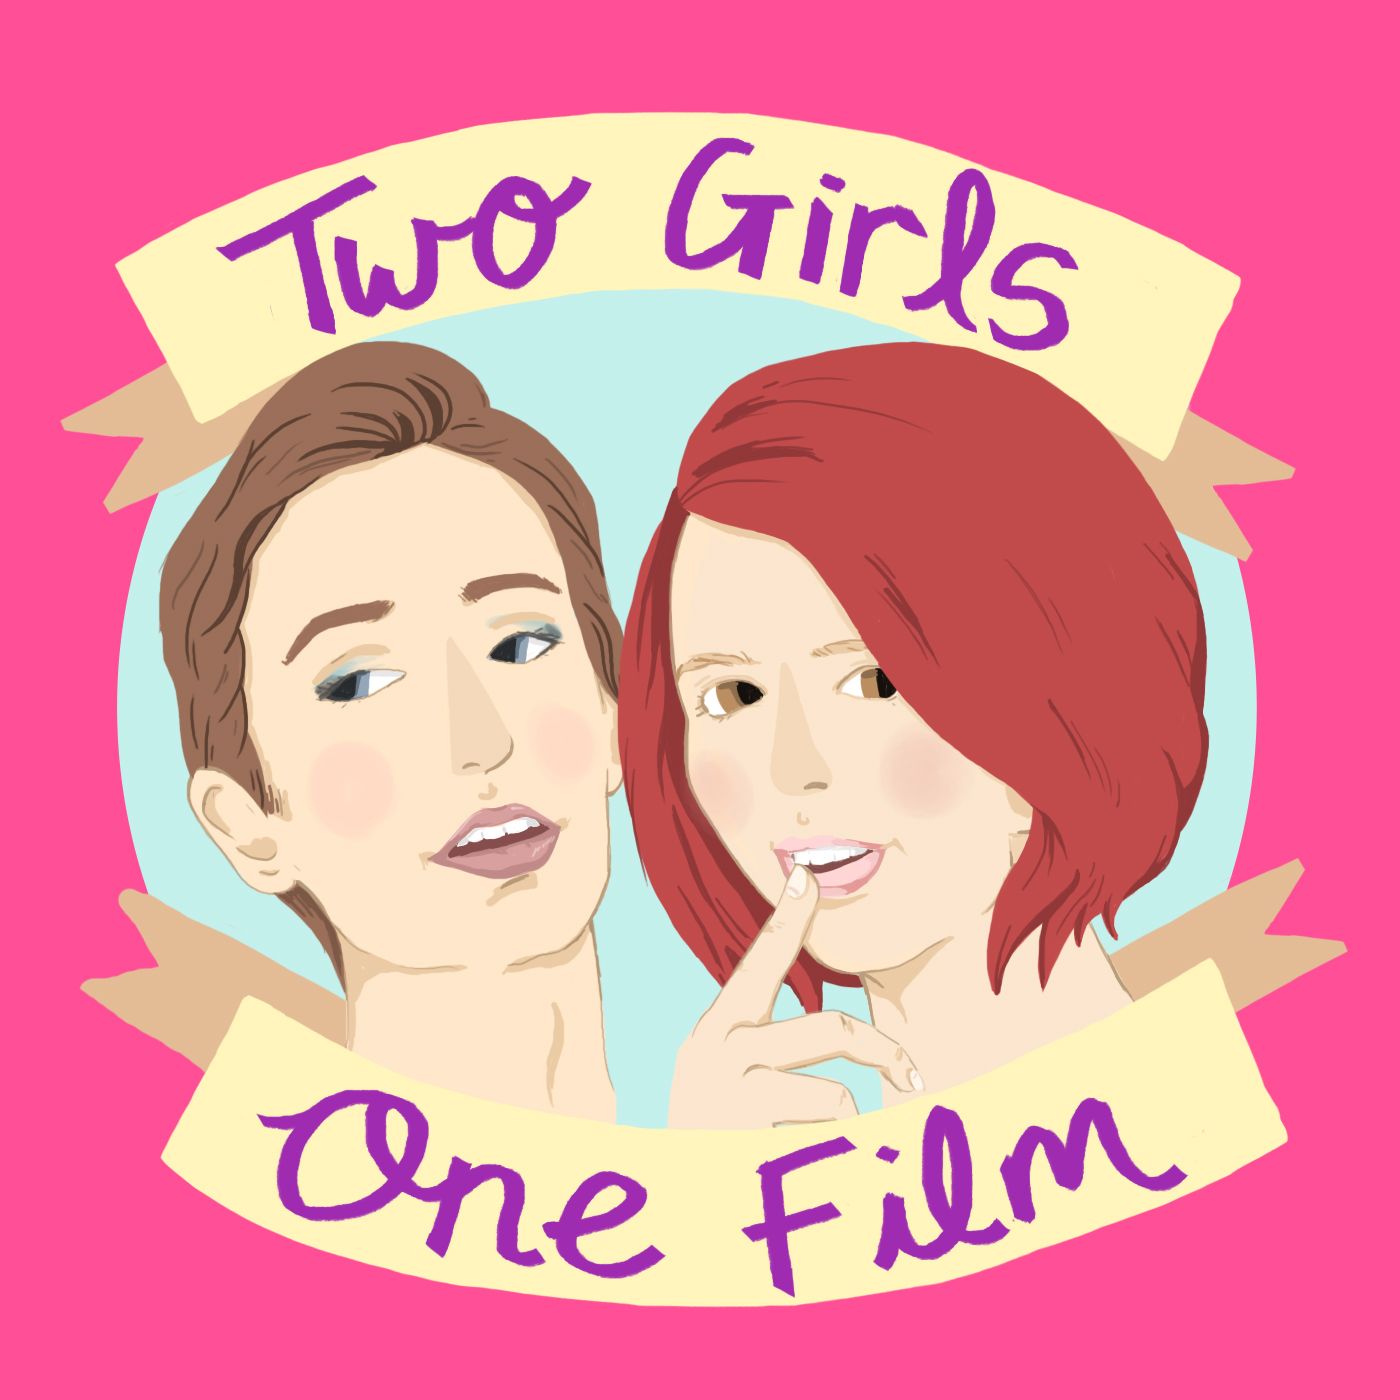 Two Girls One Film Podcast